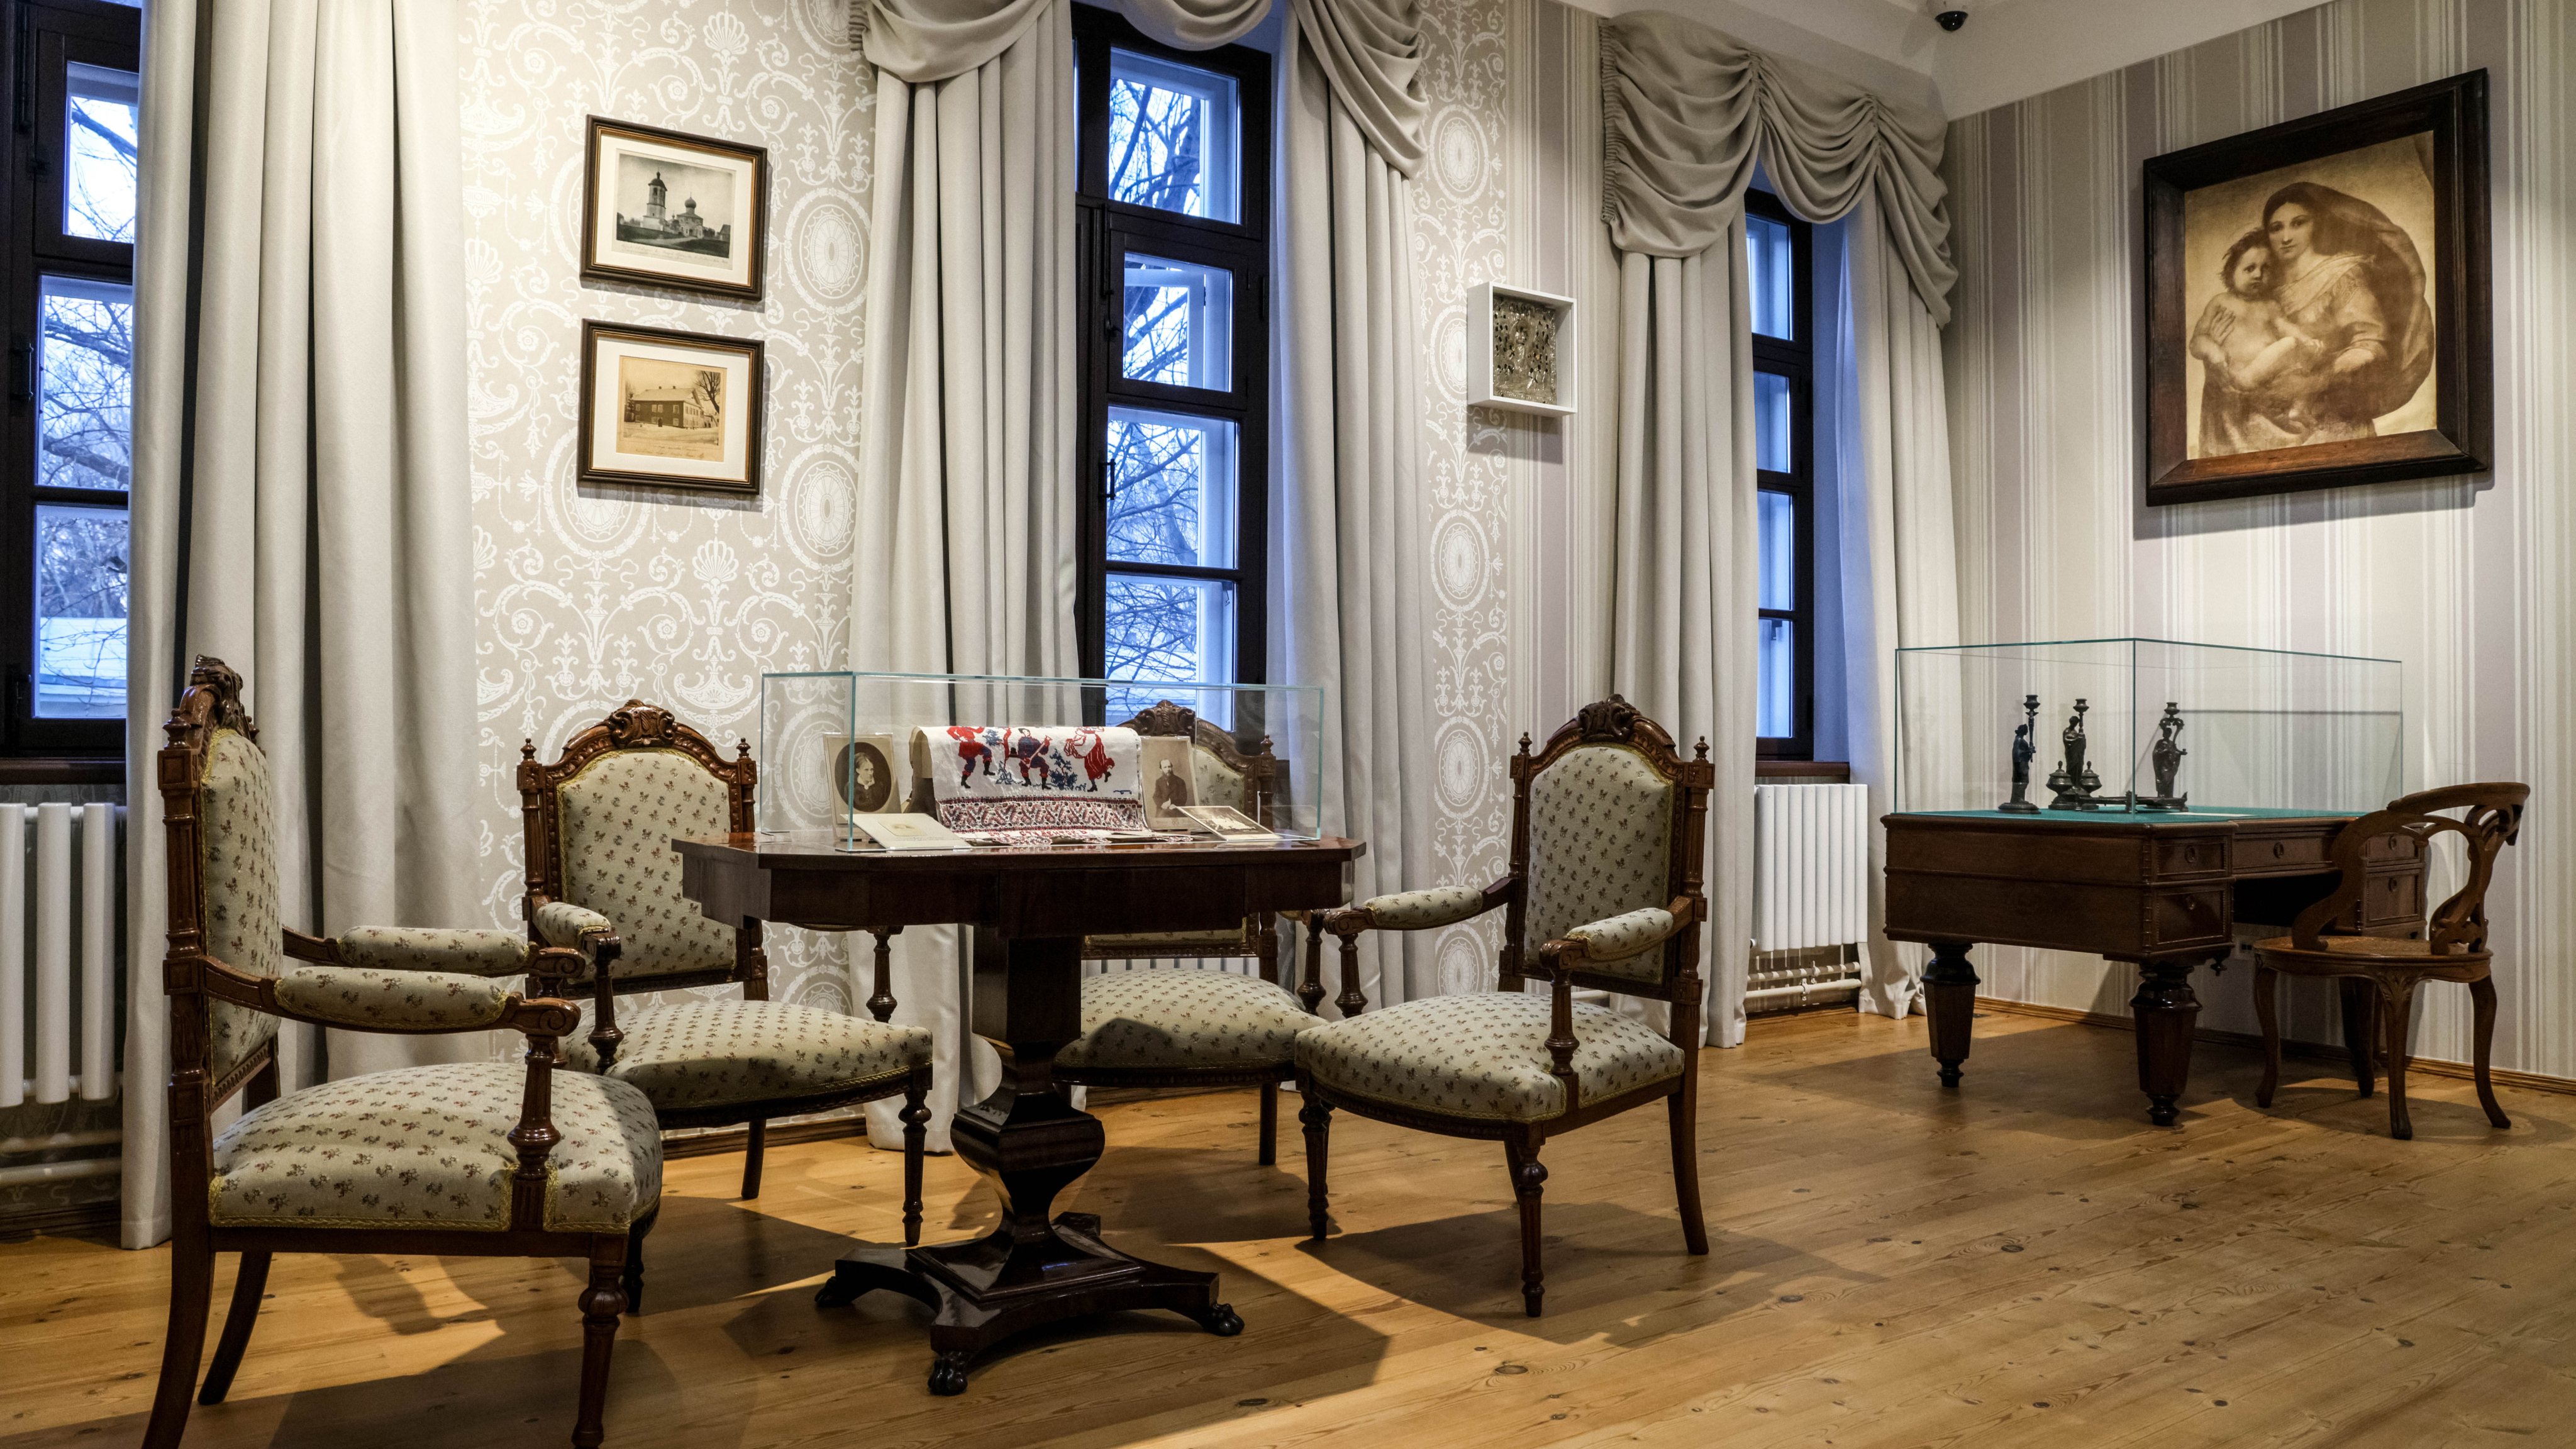 Dostoevsky House Museum opens after restoration in Moscow